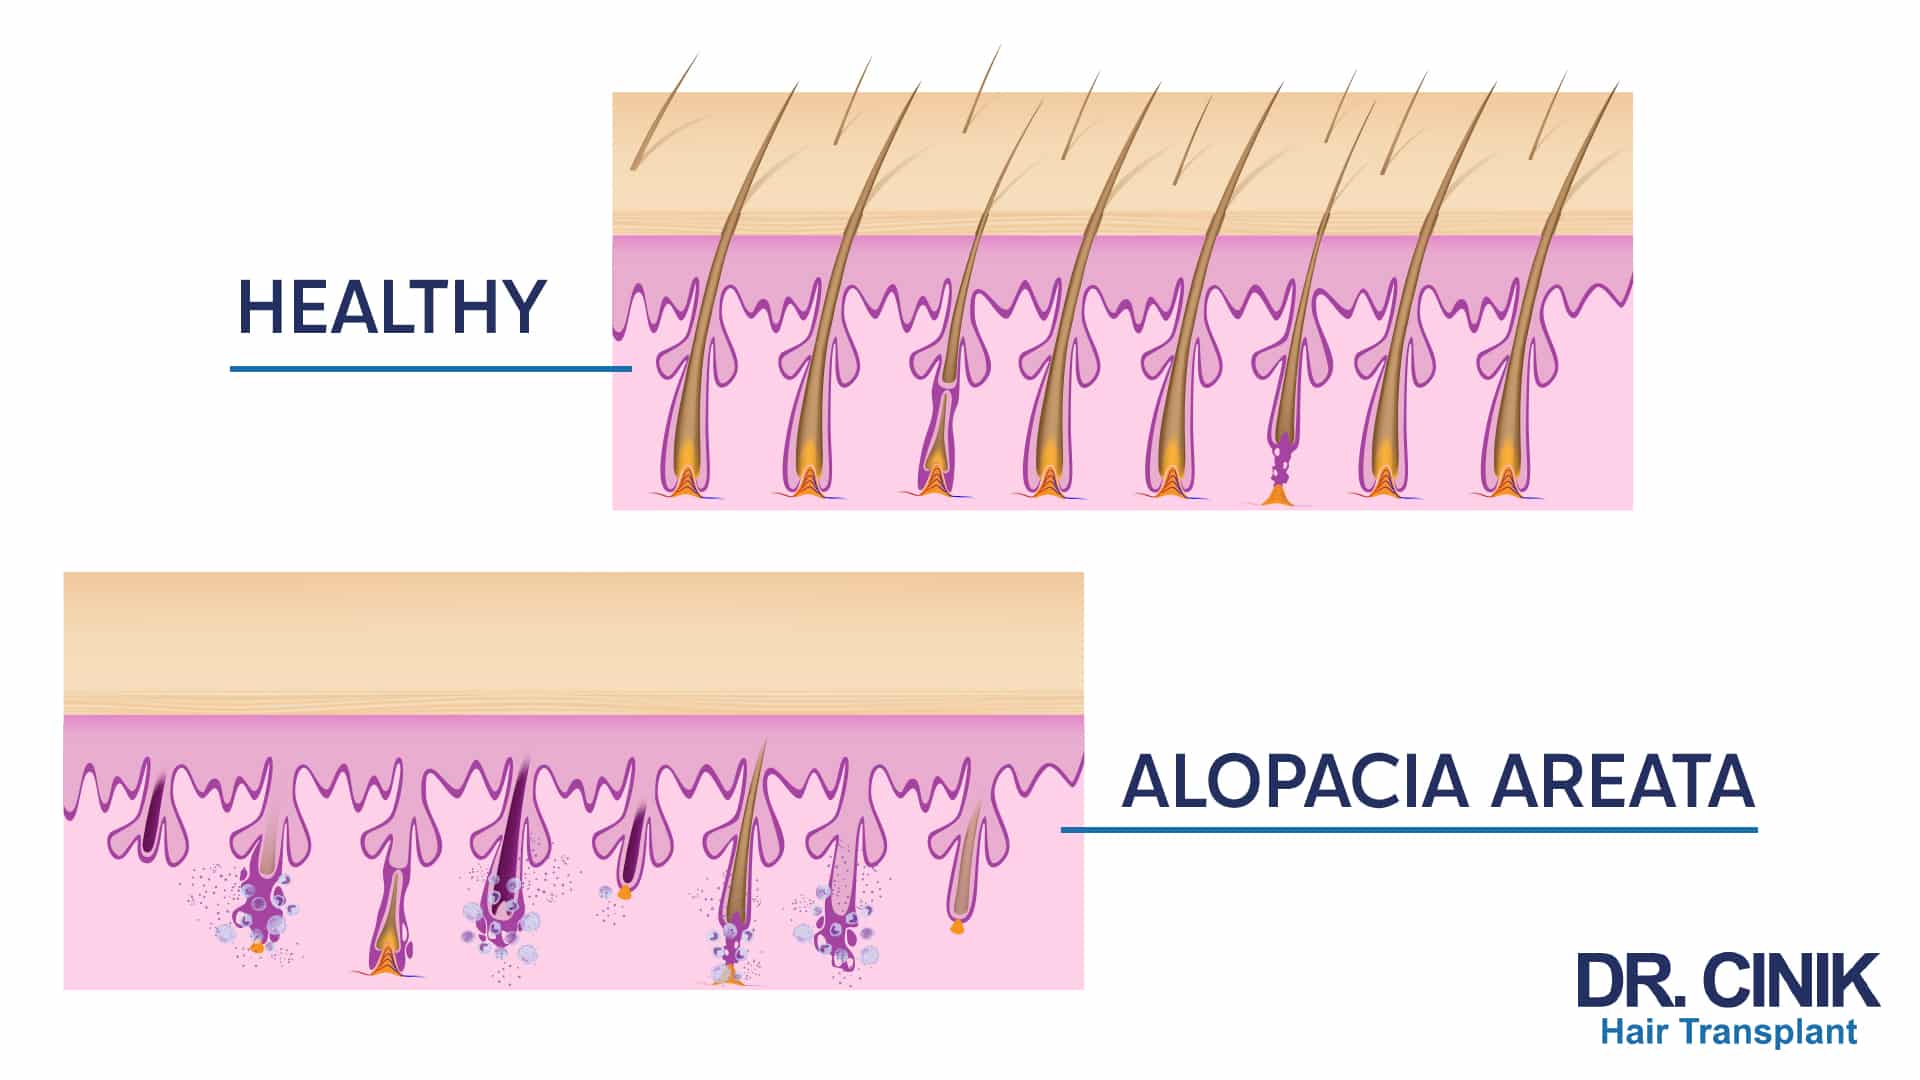 Comparative Diagram: At the top, healthy hair, and at the bottom, hair with alopecia areata.